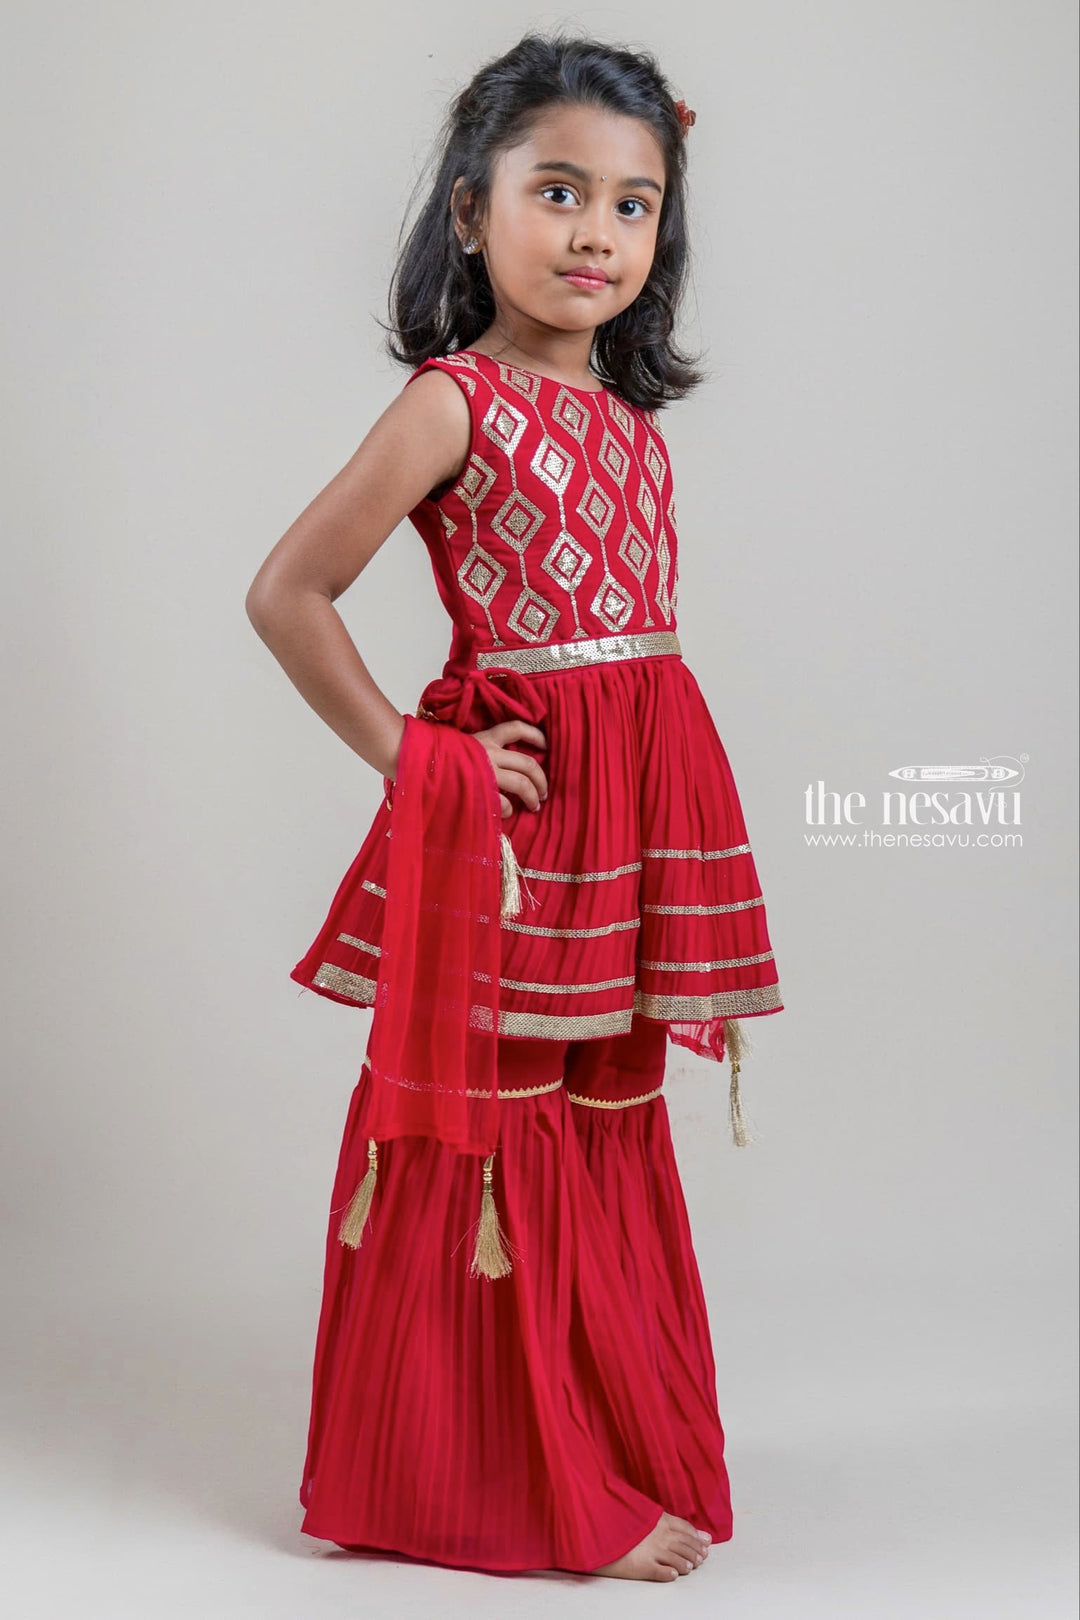 The Nesavu Girls Sharara / Plazo Set Dazzling Red Golden Glitter Sequin Embroidered Top With Palazzo Suit For Girls Nesavu Premium Palazzo Suit For Young Girls | Palazzo With Tops | The Nesavu